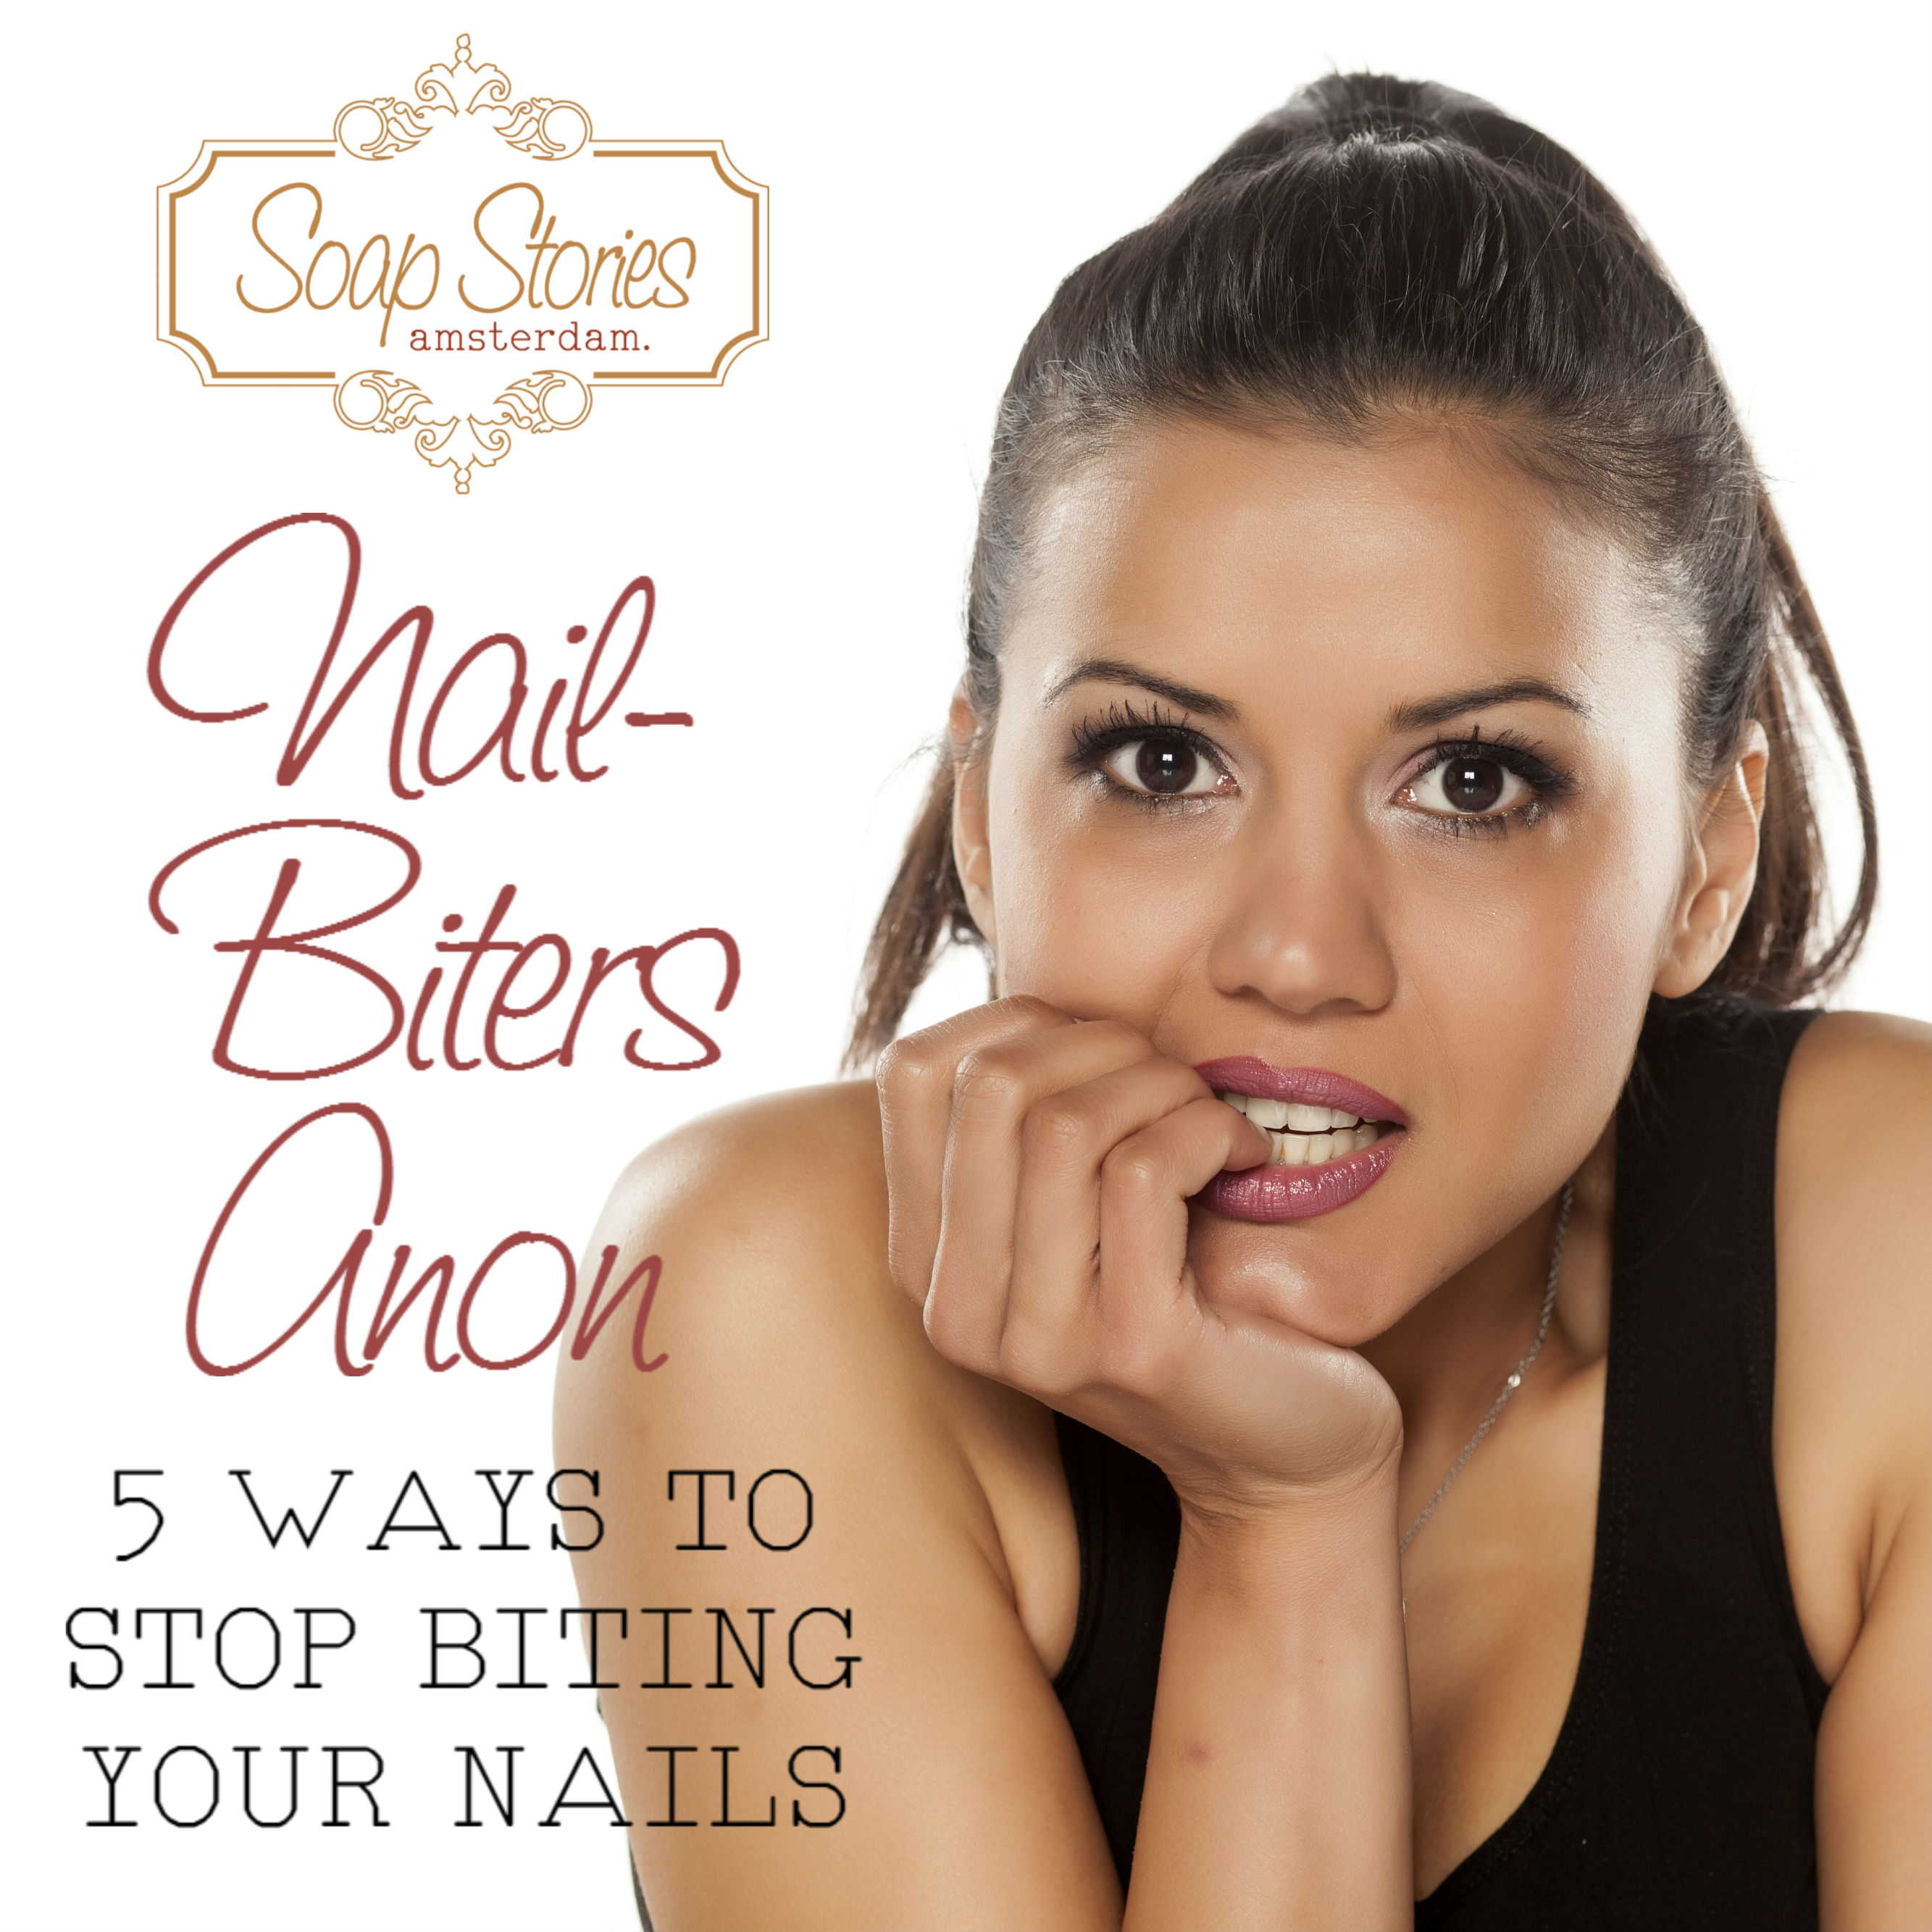 Nail-Biters Anonymous: 5 Ways to Stop Biting Your Nails - Soap Stories